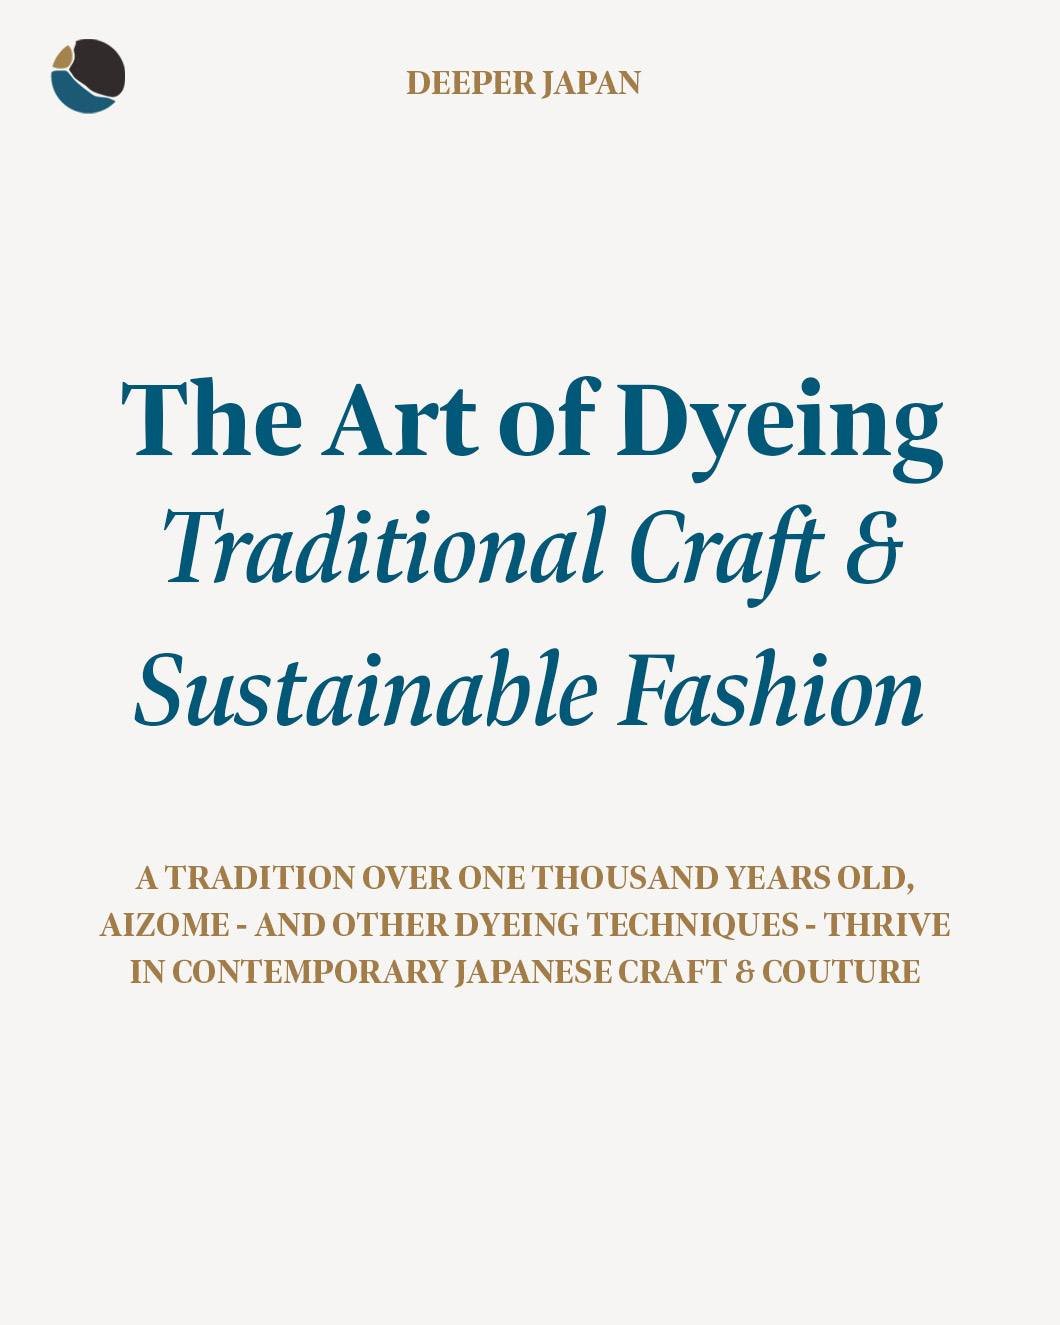 Recently, Japanese techniques in particular have been experiencing a resurgence in the fashion world. 

As the fashion industry attempts to move away from fast fashion and click-to-buy purchasing, the sustainable practices inherent to traditional aiz